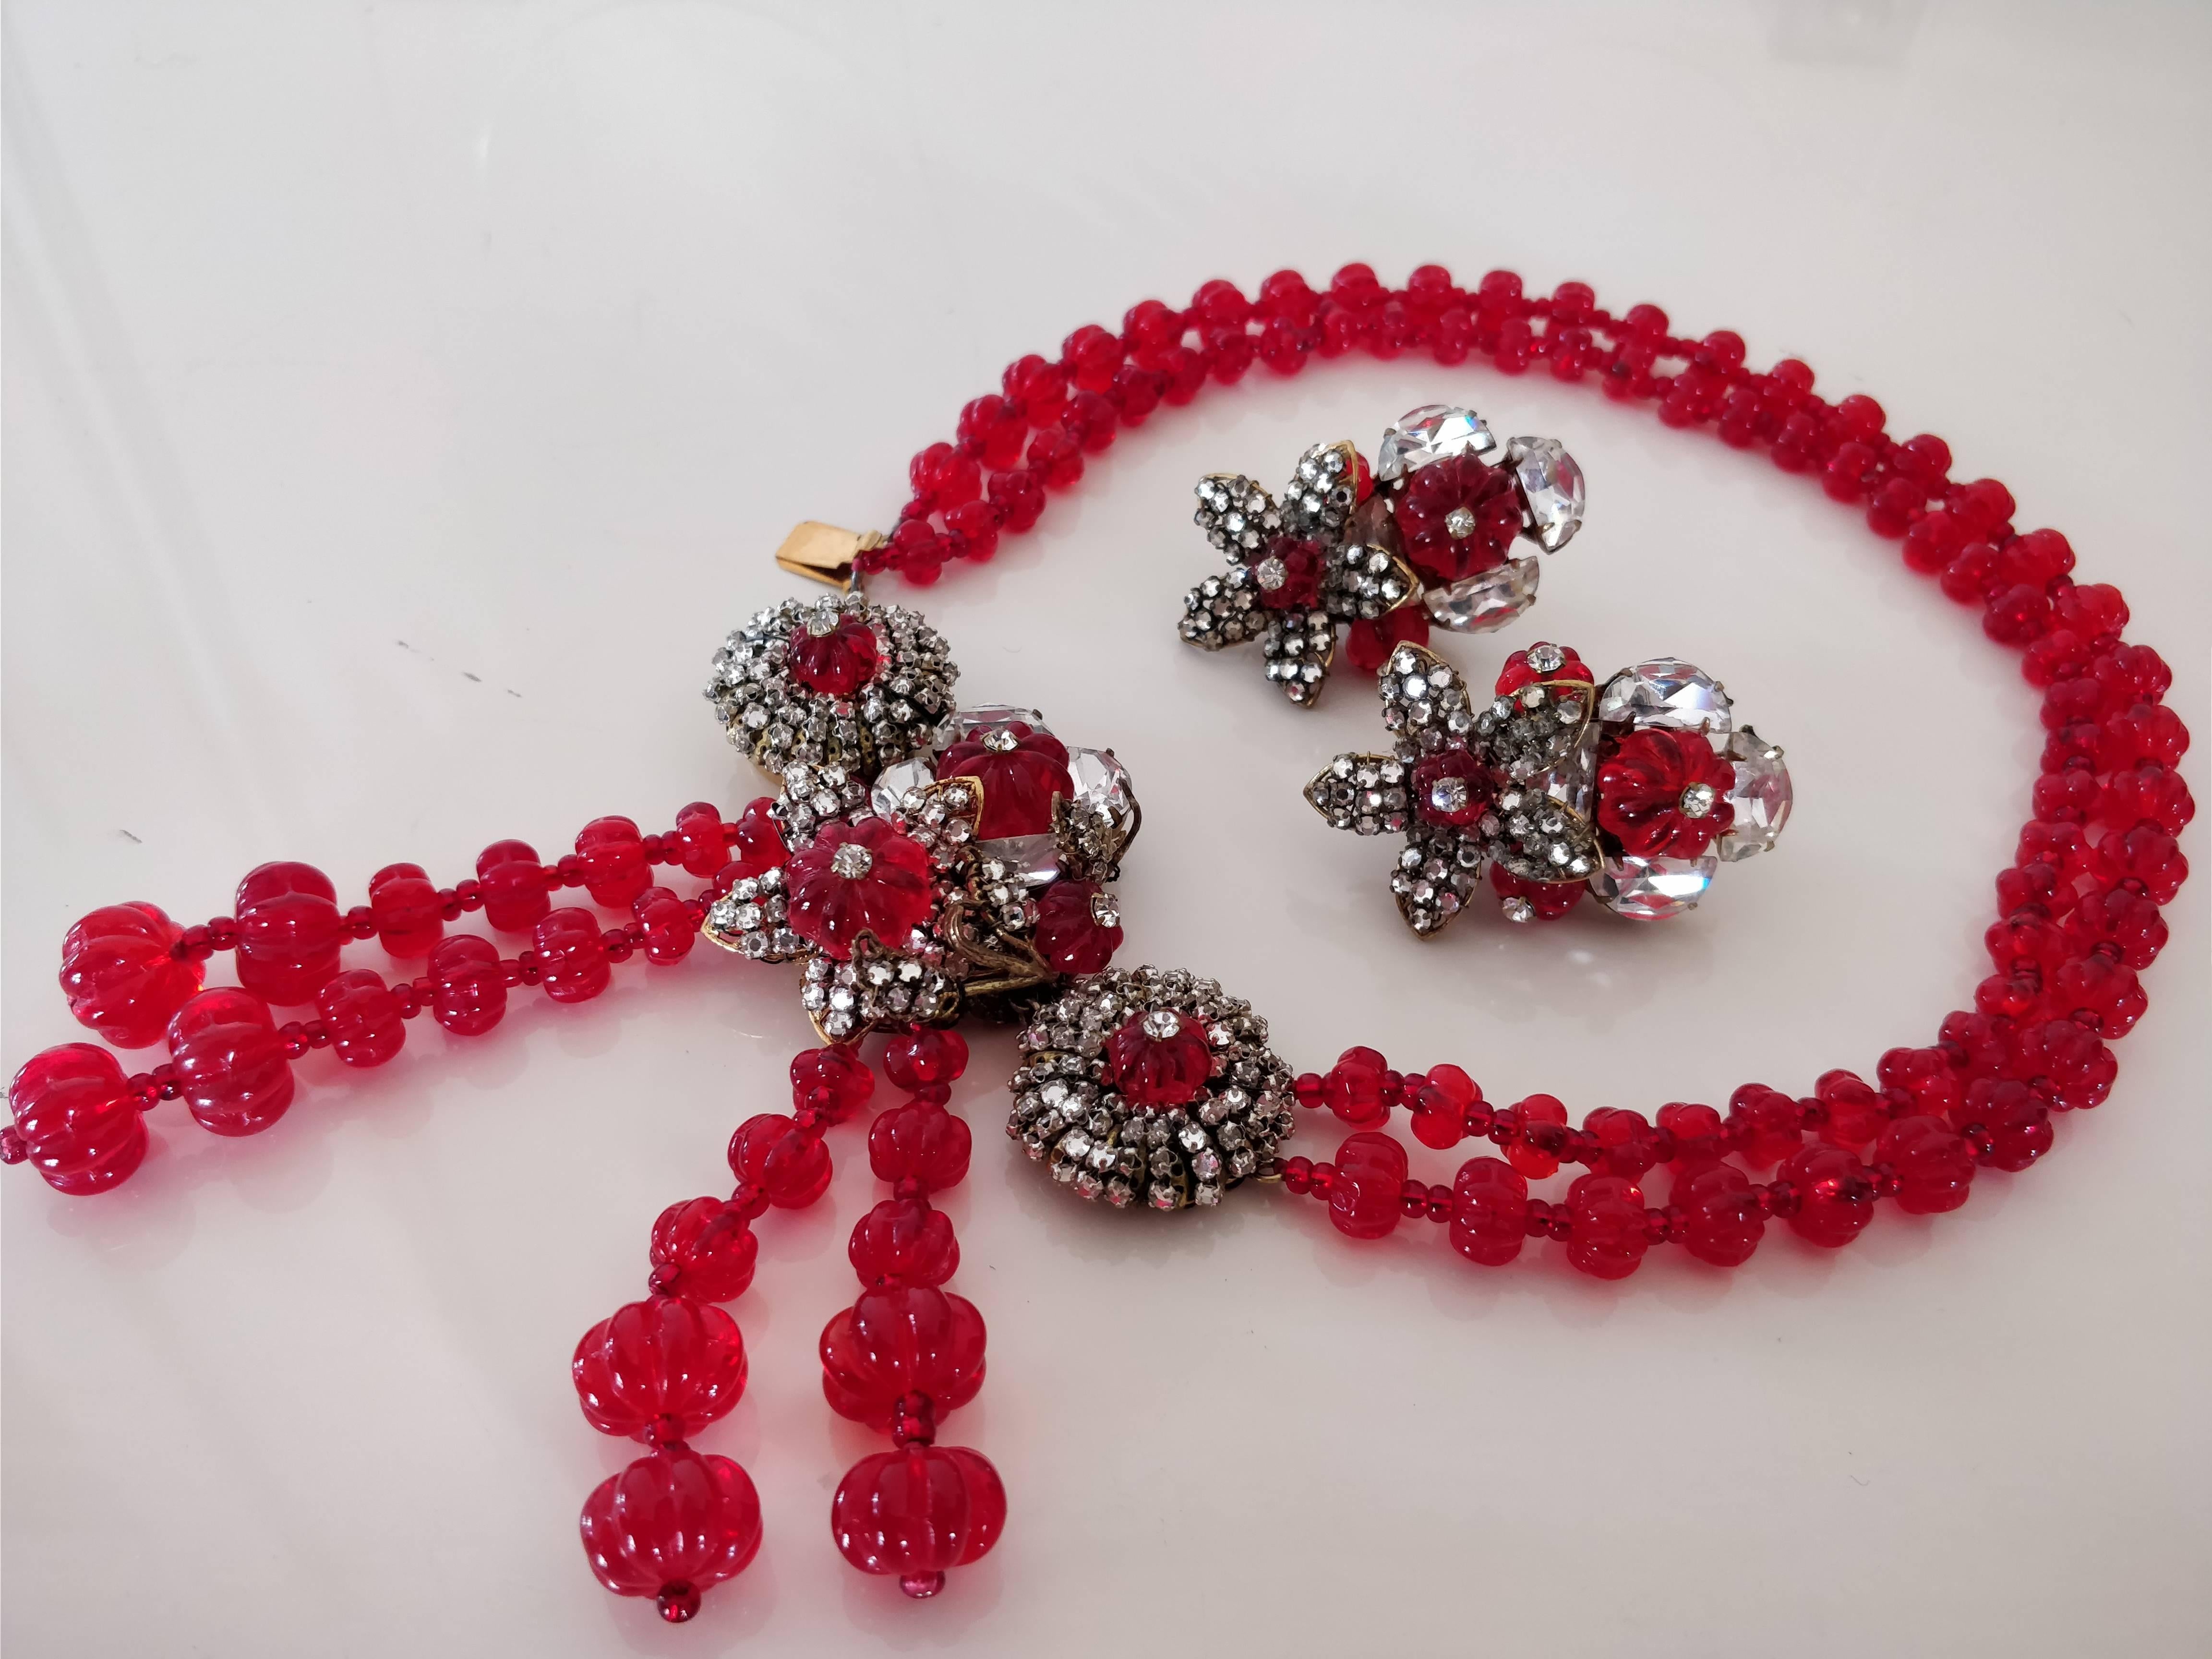 Anglo-Indian 1940s Miriam Haskell Ruby Red Glass Bead, Rhinestone Necklace and Earring Set